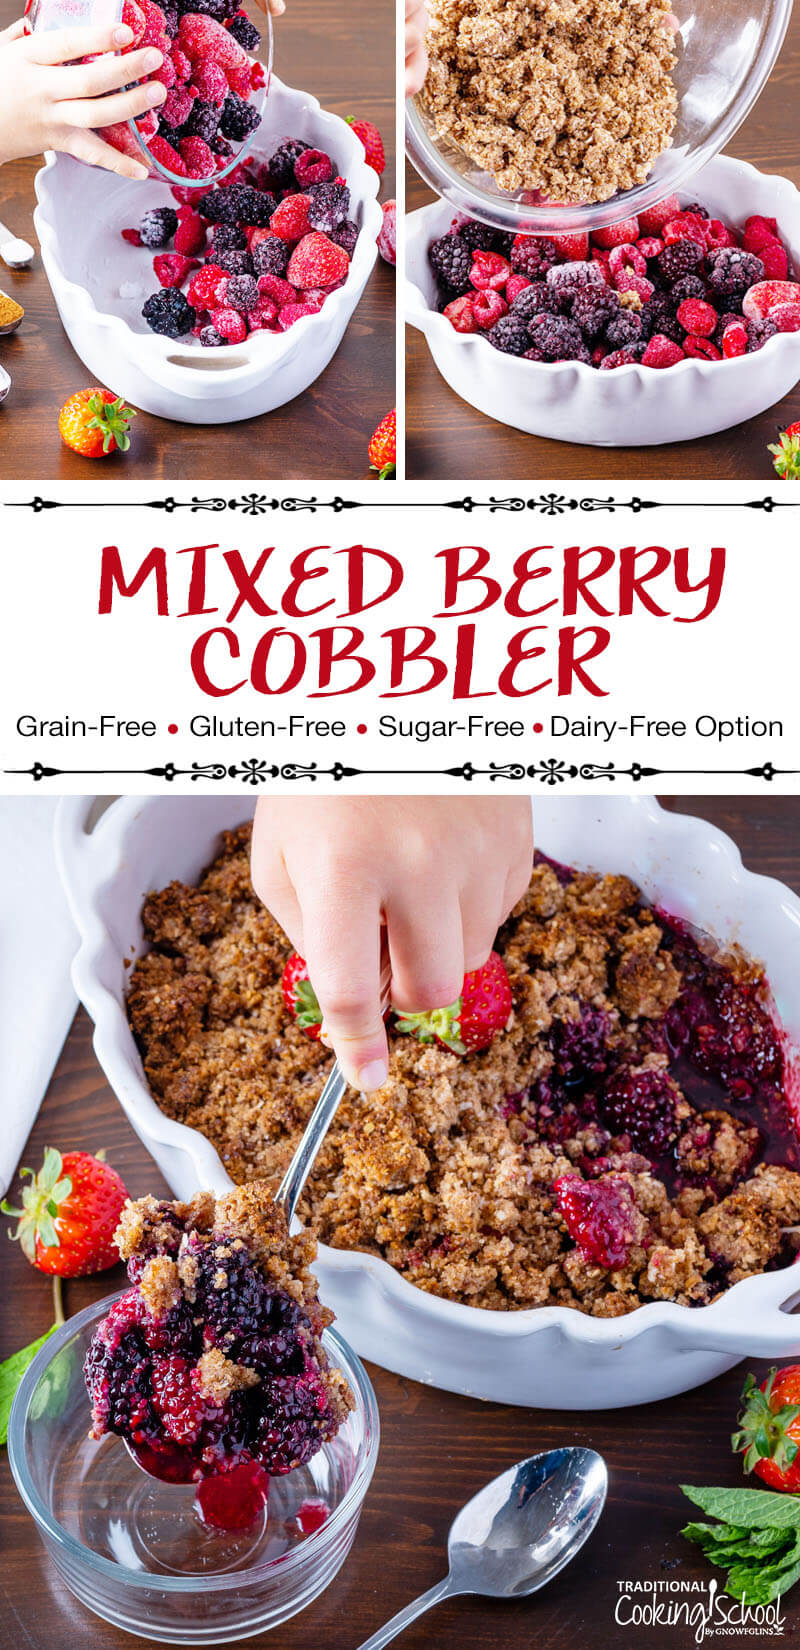 Photo collage of making cobbler in a white ceramic casserole dish with scalloped edges: pouring the berries in, pouring the crumble topping, and photos of the finished dessert. Text overlay says: "Mixed Berry Cobbler (Grain-Free, Gluten-Free, Sugar-Free, Dairy-Free Option)"